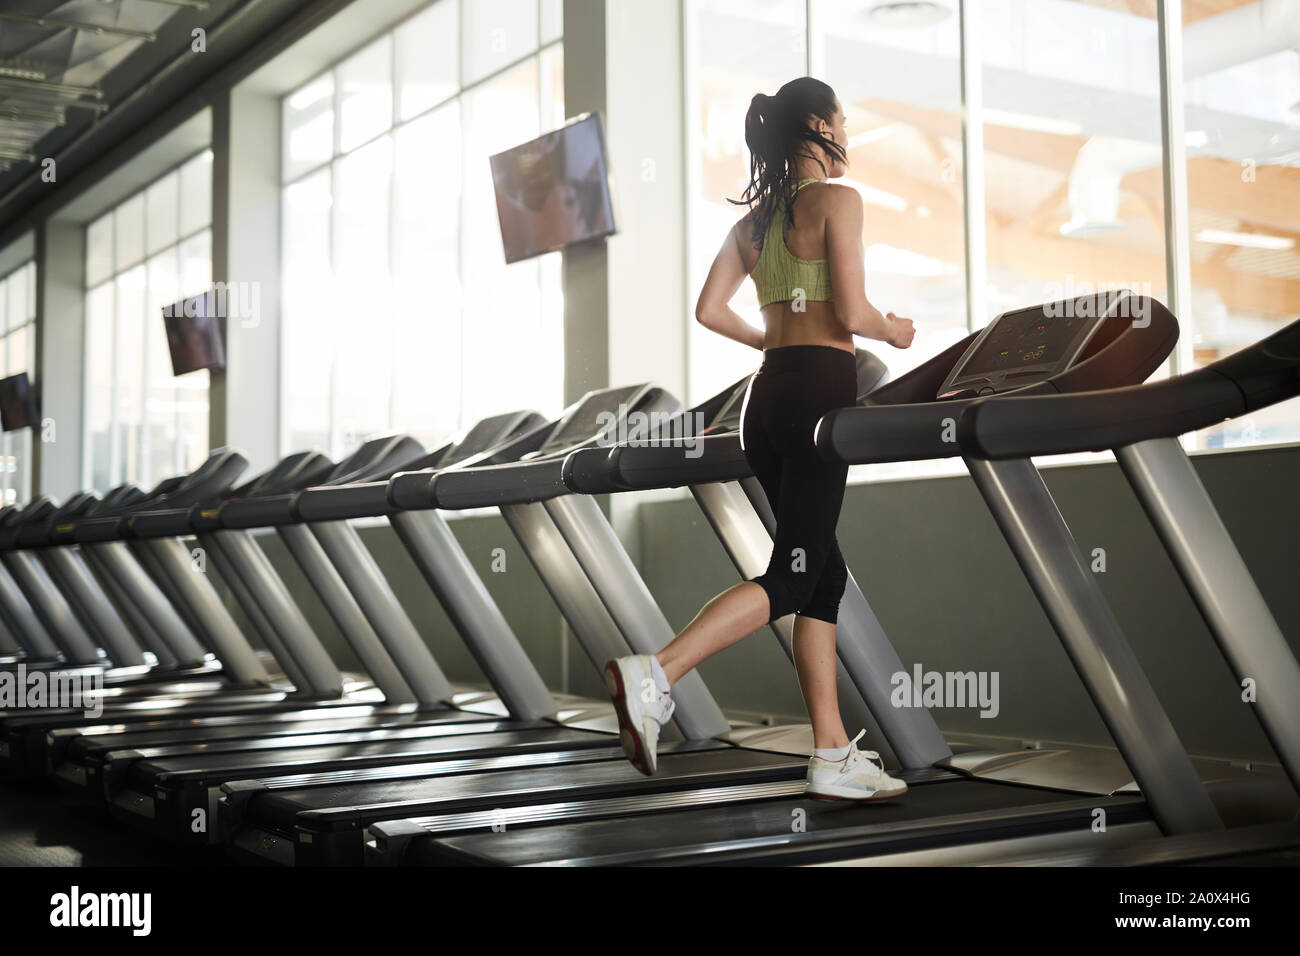 Full length wide angle portrait of young woman running on treadmill alone in empty gym, copy space Stock Photo